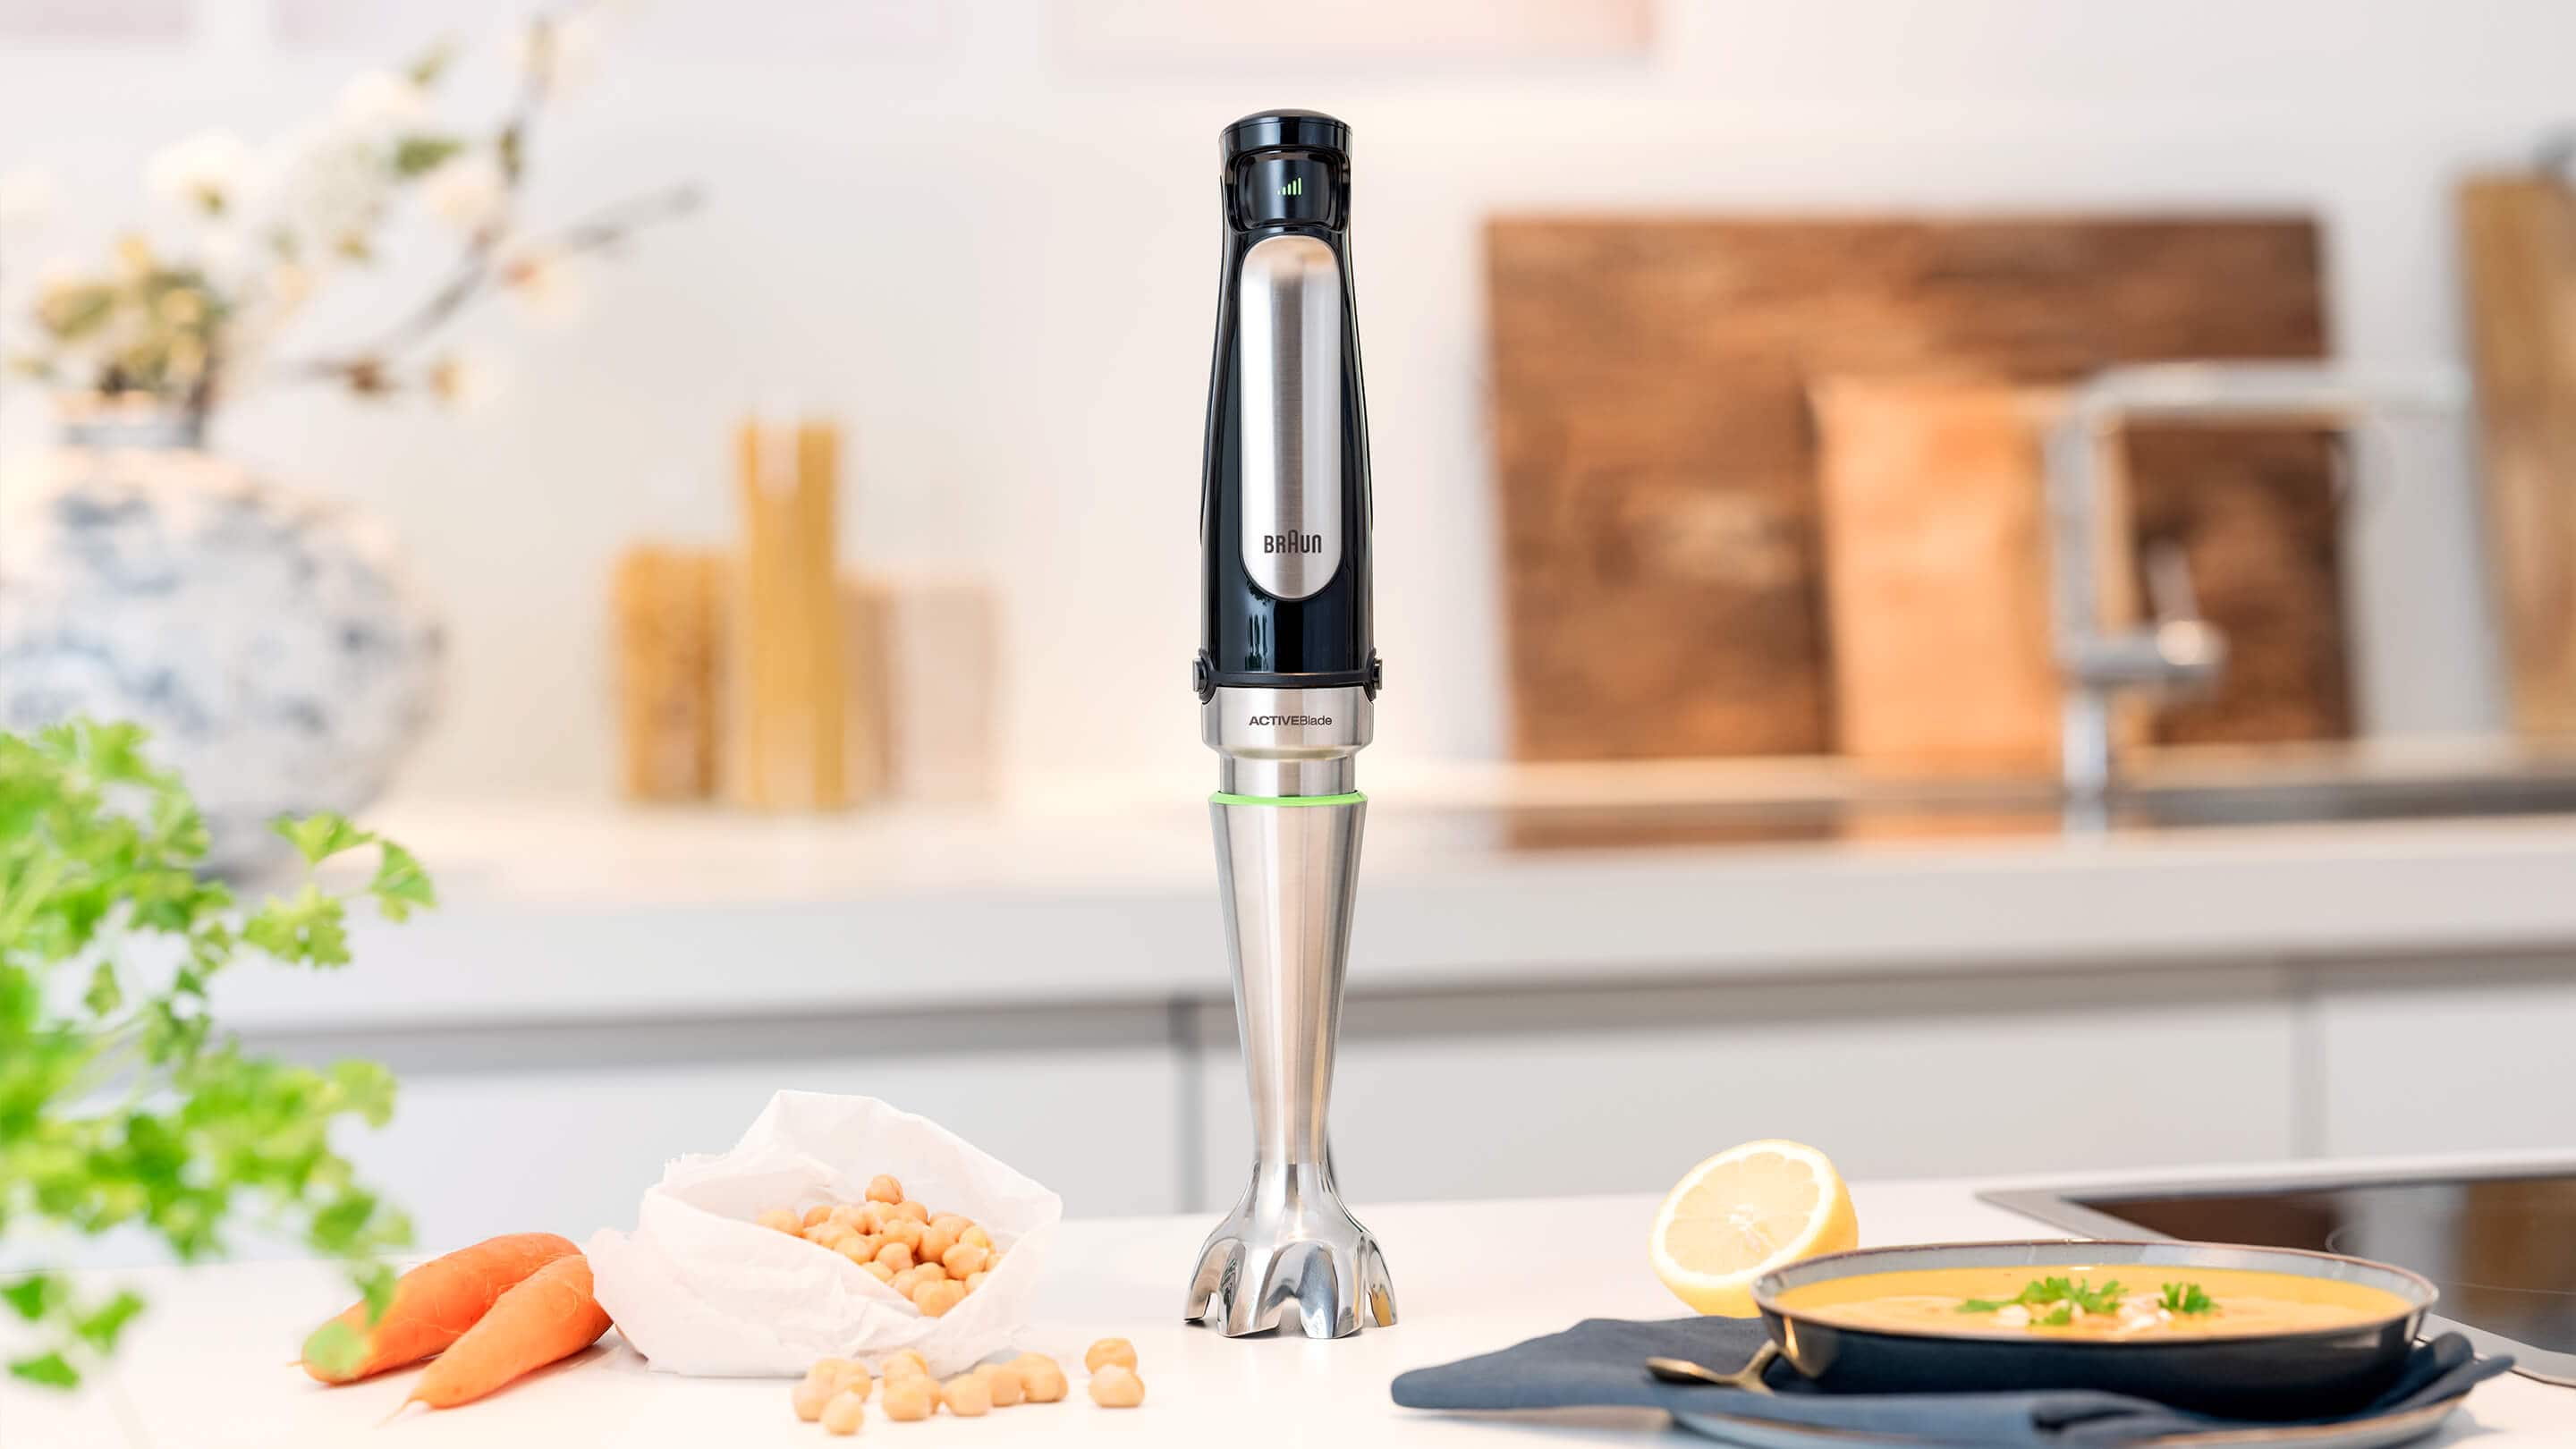 Braun MQ7 MultiQuick Hand Blender Review: Slays Every Sauce and